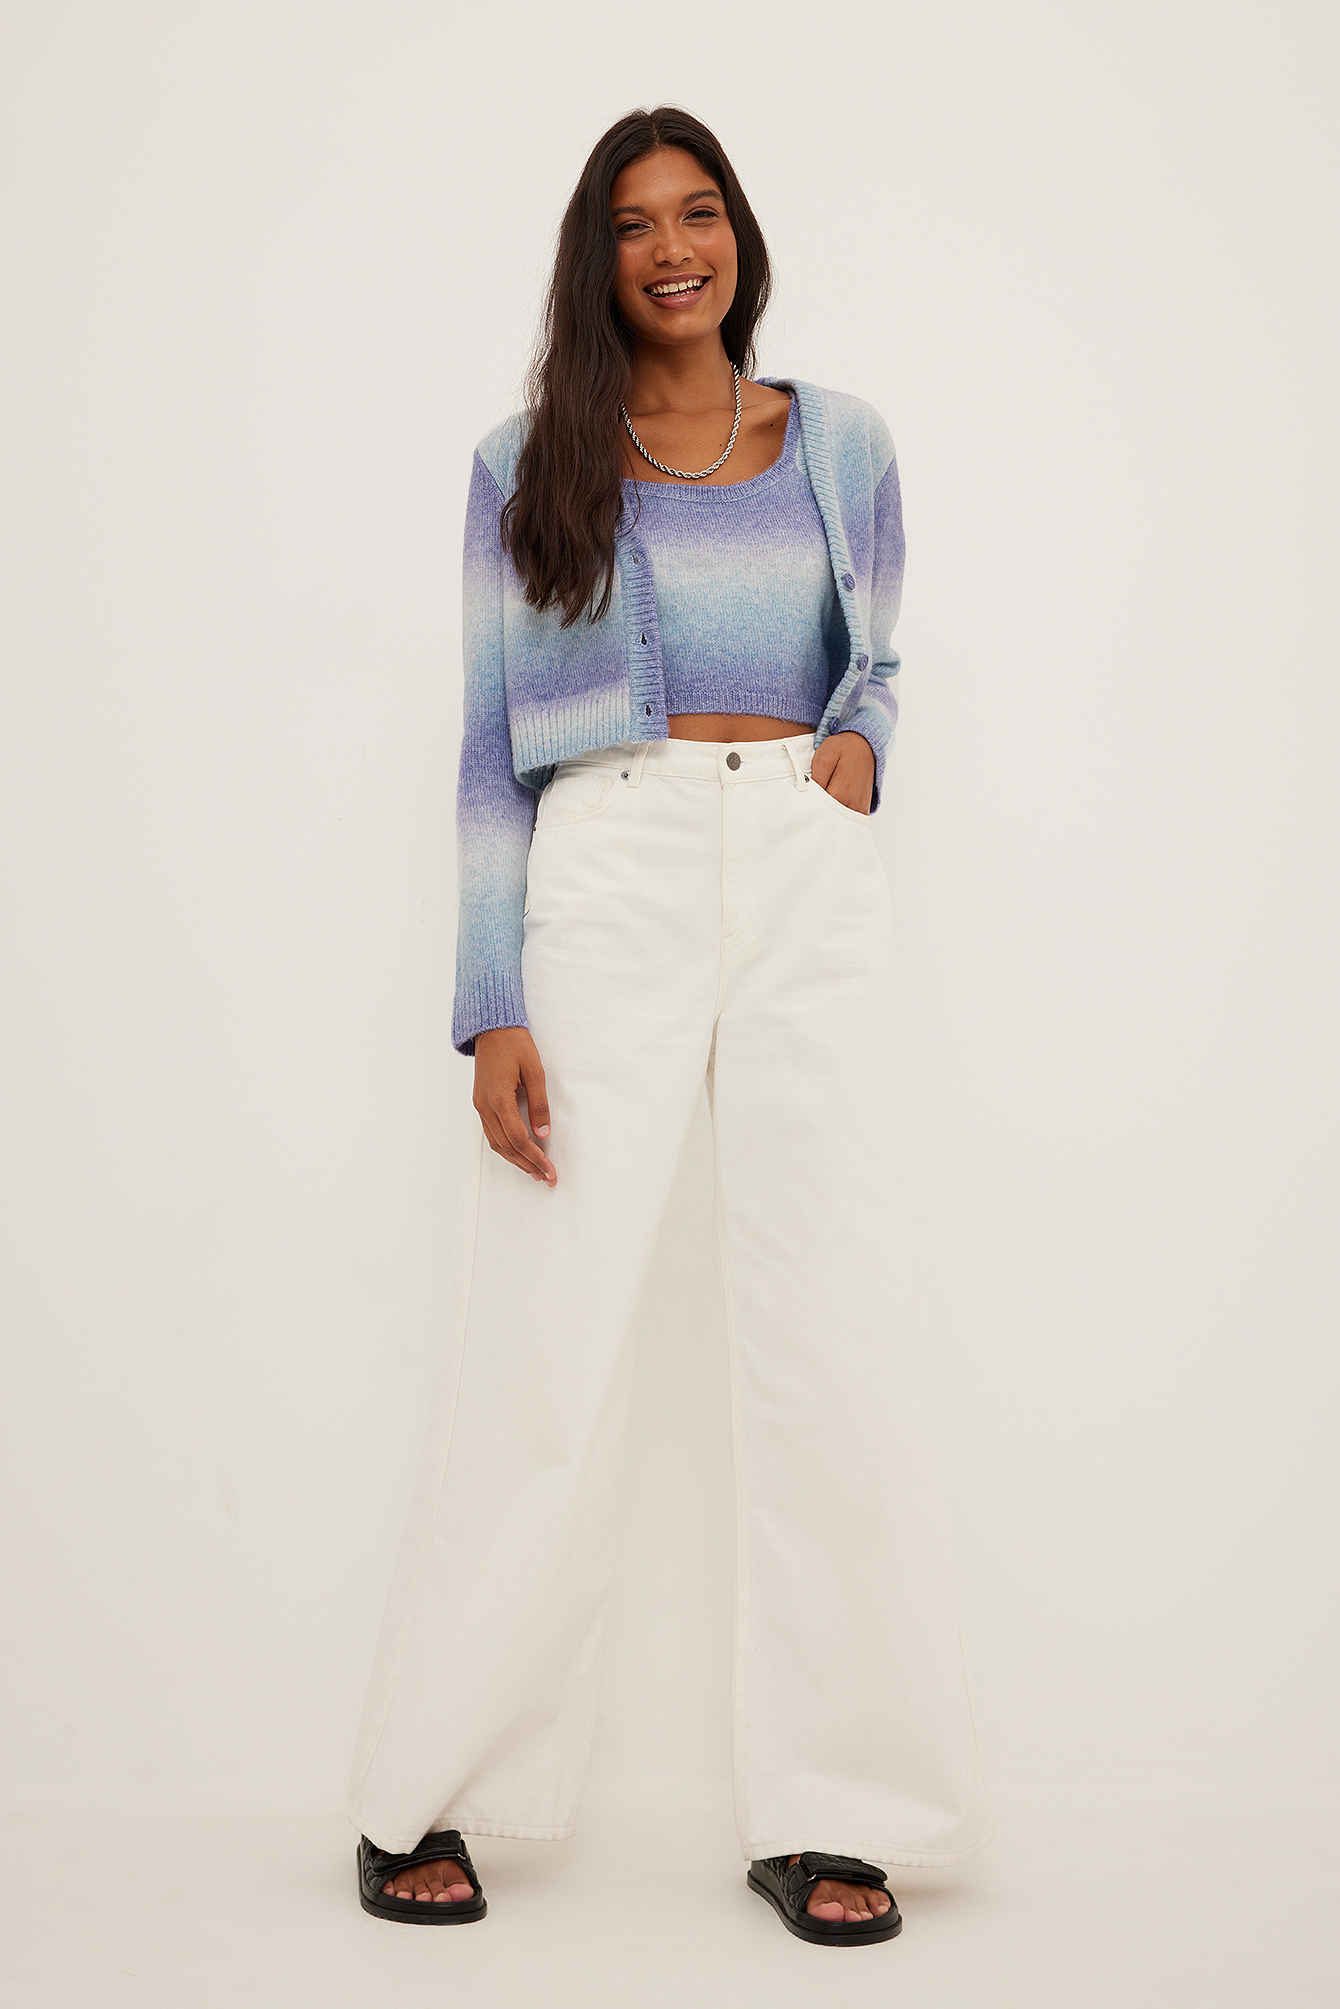 Knitted Ombre Cropped Top Outfit